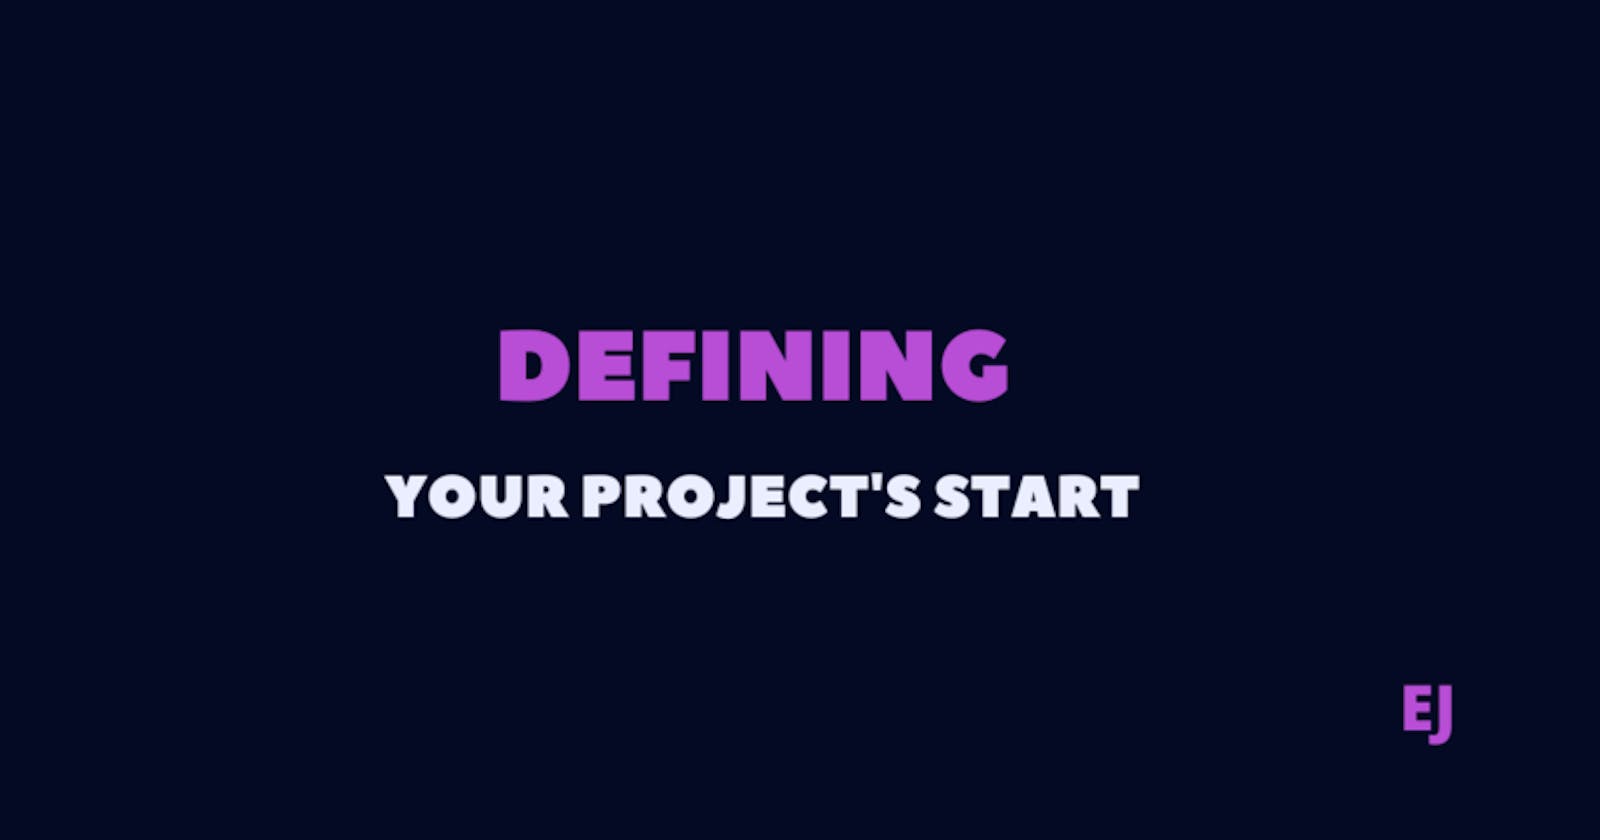 Defining your project's start